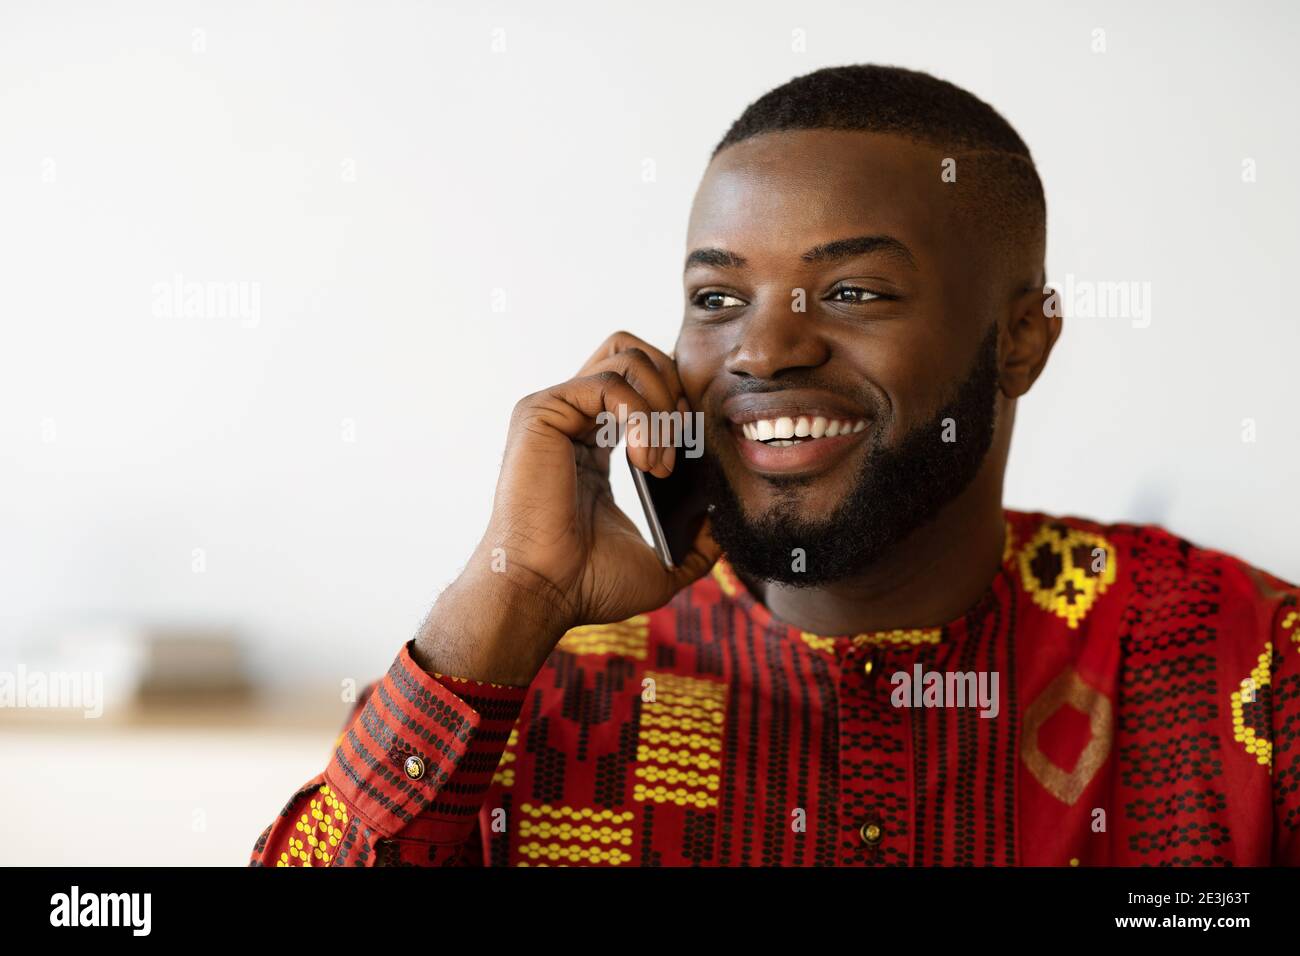 Mobile Call. Smiling African American Guy In Ethnic Shirt Talking On Cellphone Stock Photo